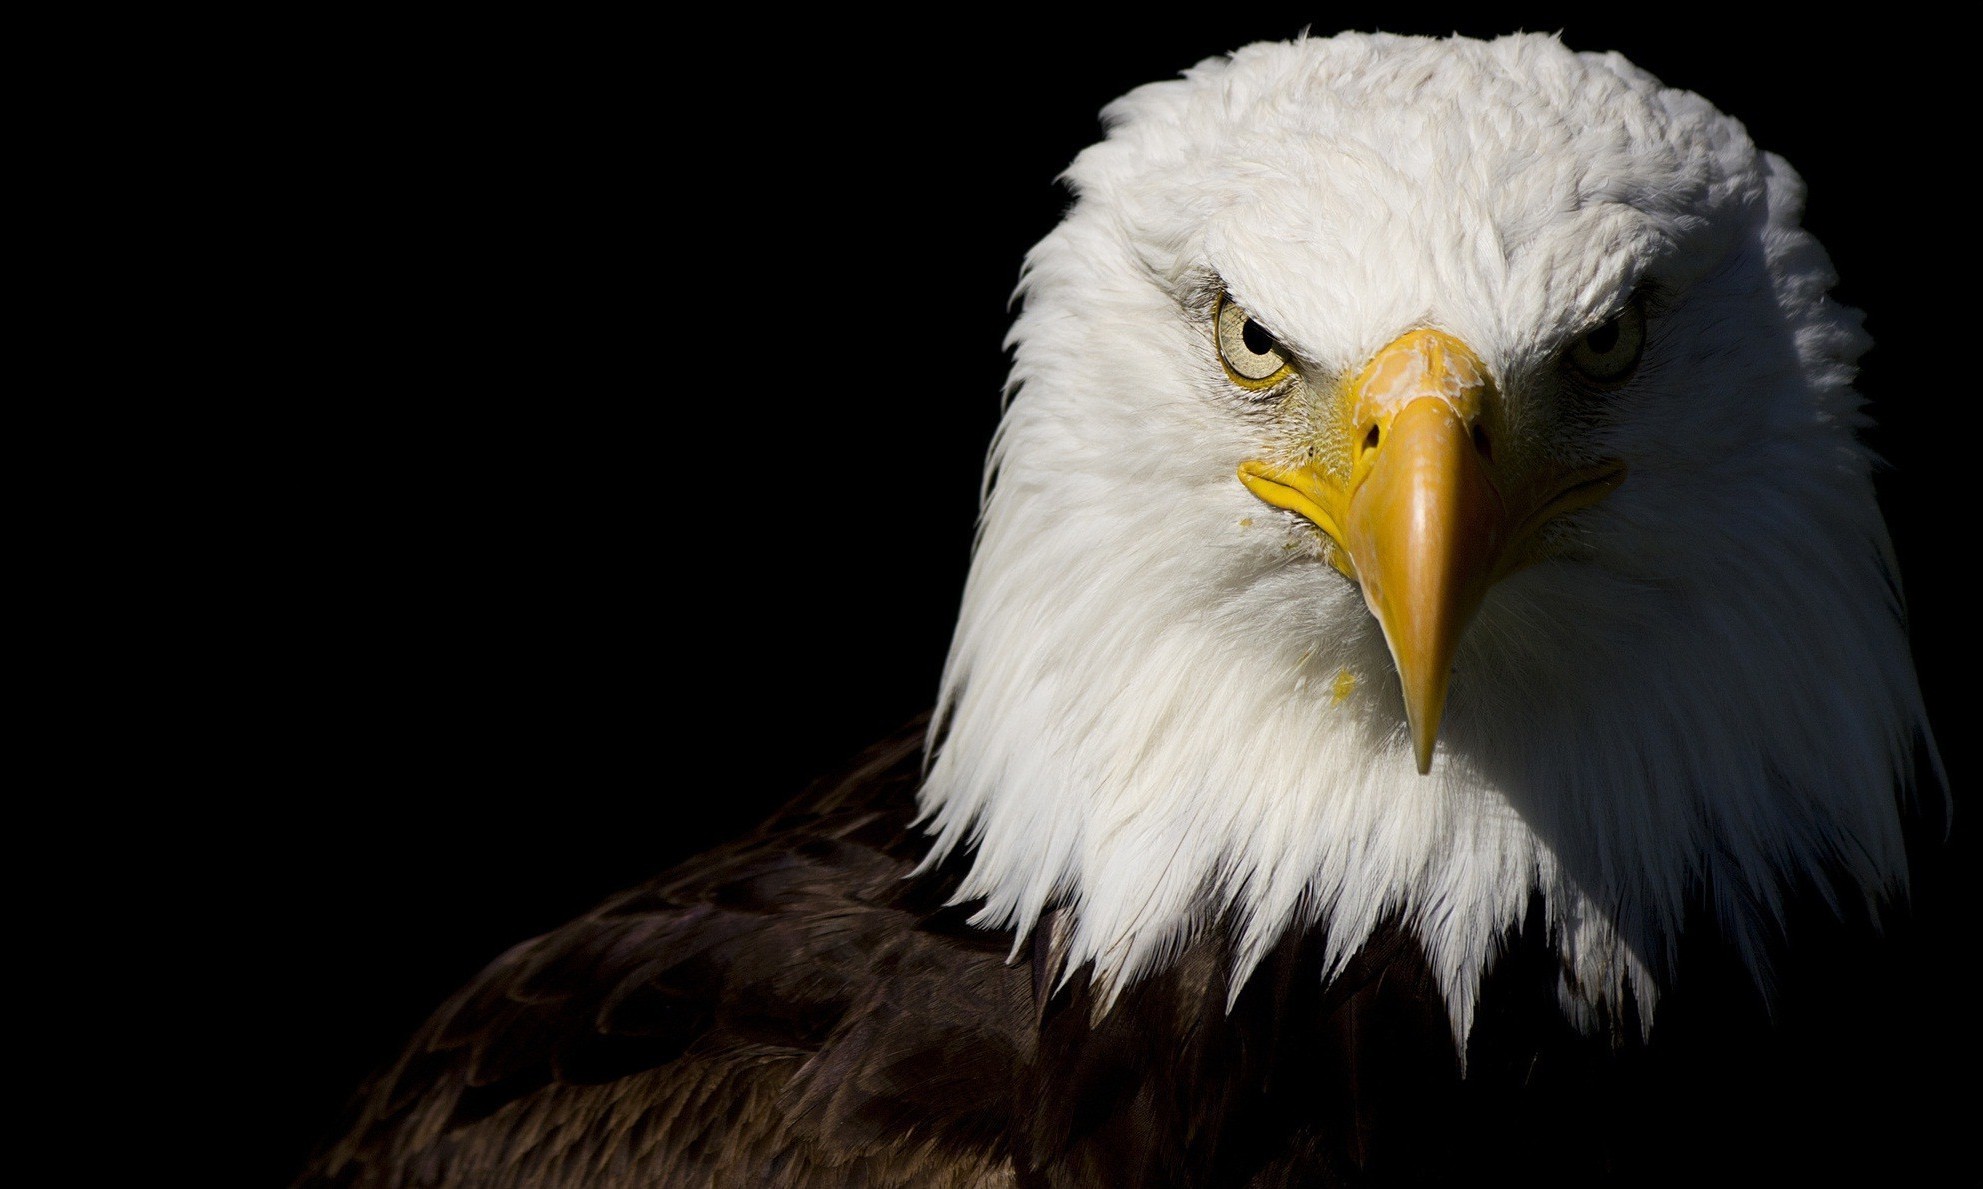  eagle  Wallpapers  HD  Desktop  and Mobile Backgrounds 